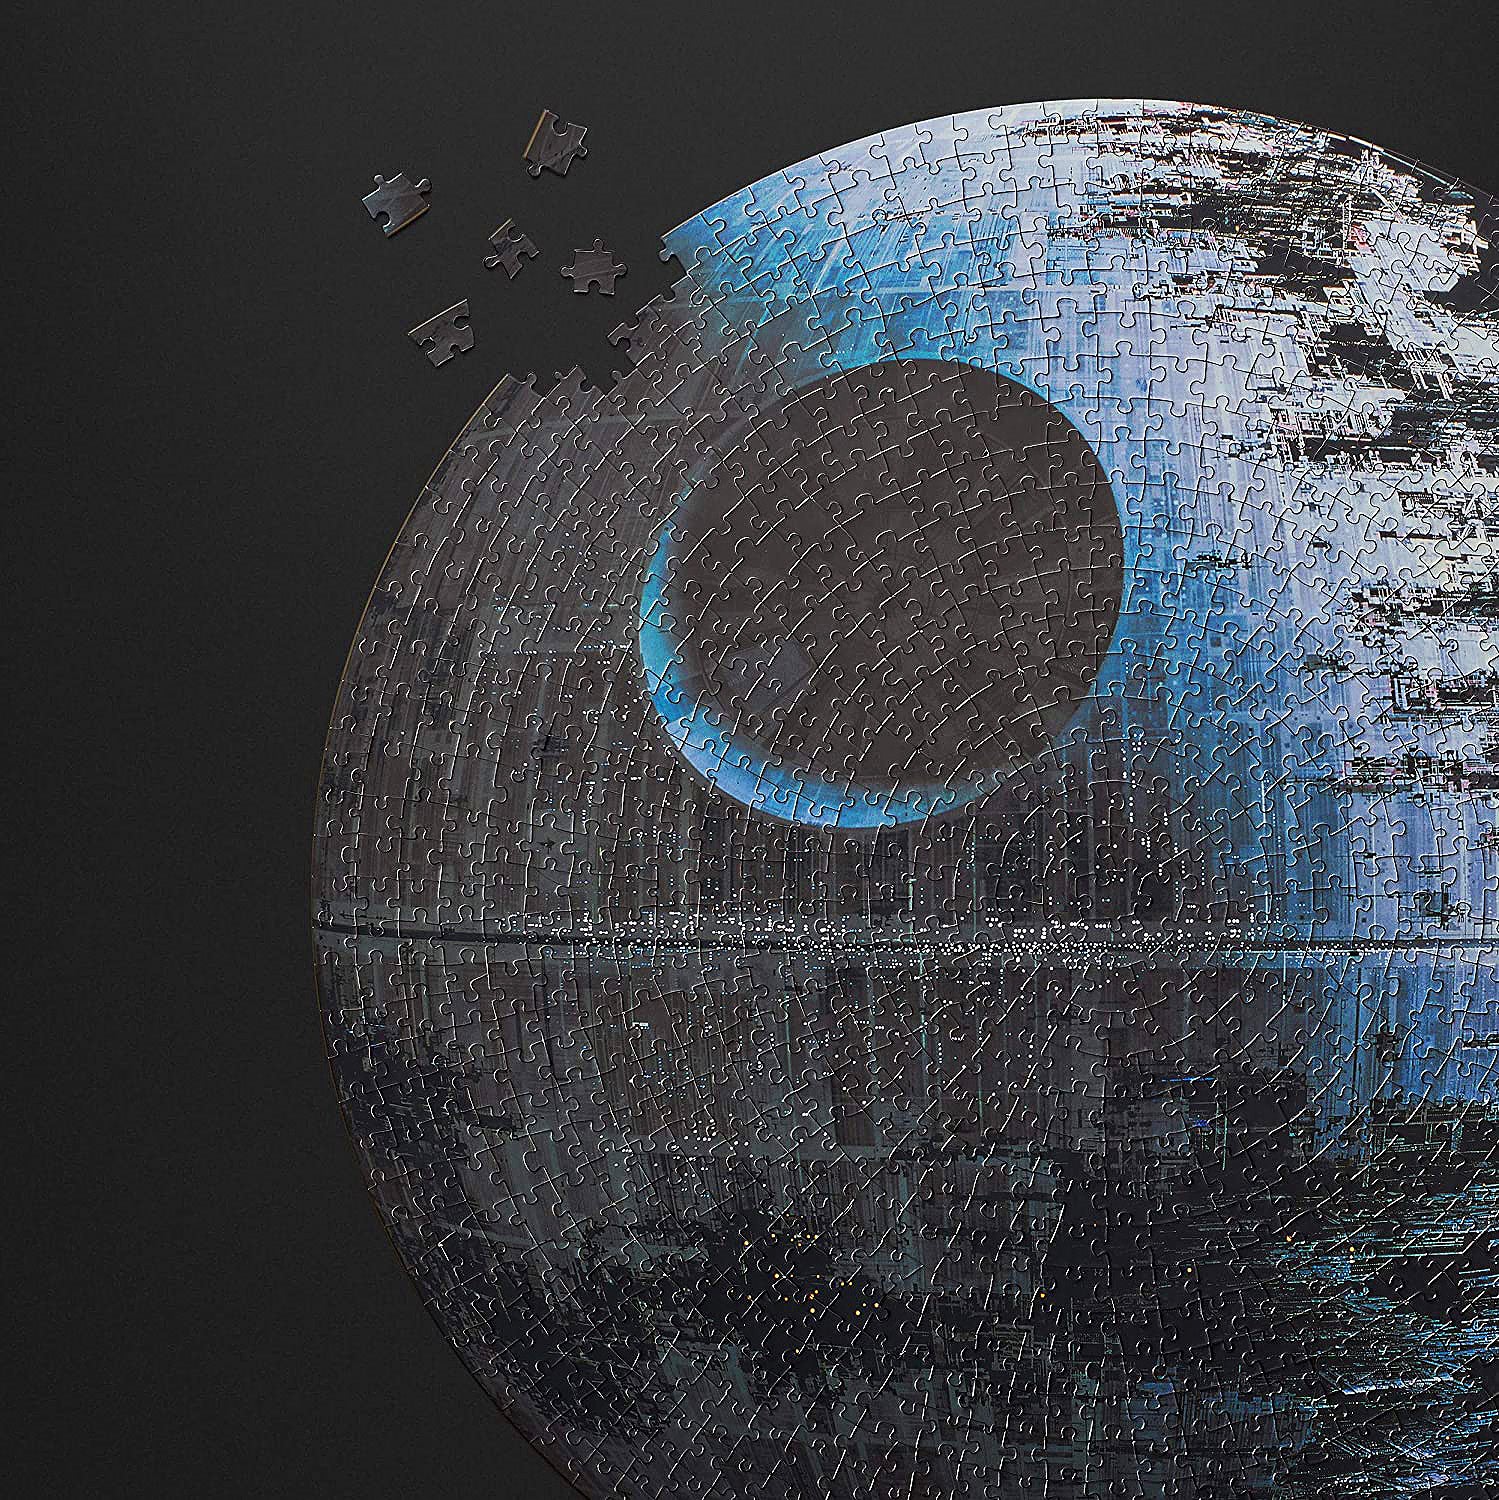 The Death Star was the Empire’s ultimate weapon: a moon-sized space station with the ability to destroy an entire planet. The Star Wars jigsaw puzzle is just as terrifying.